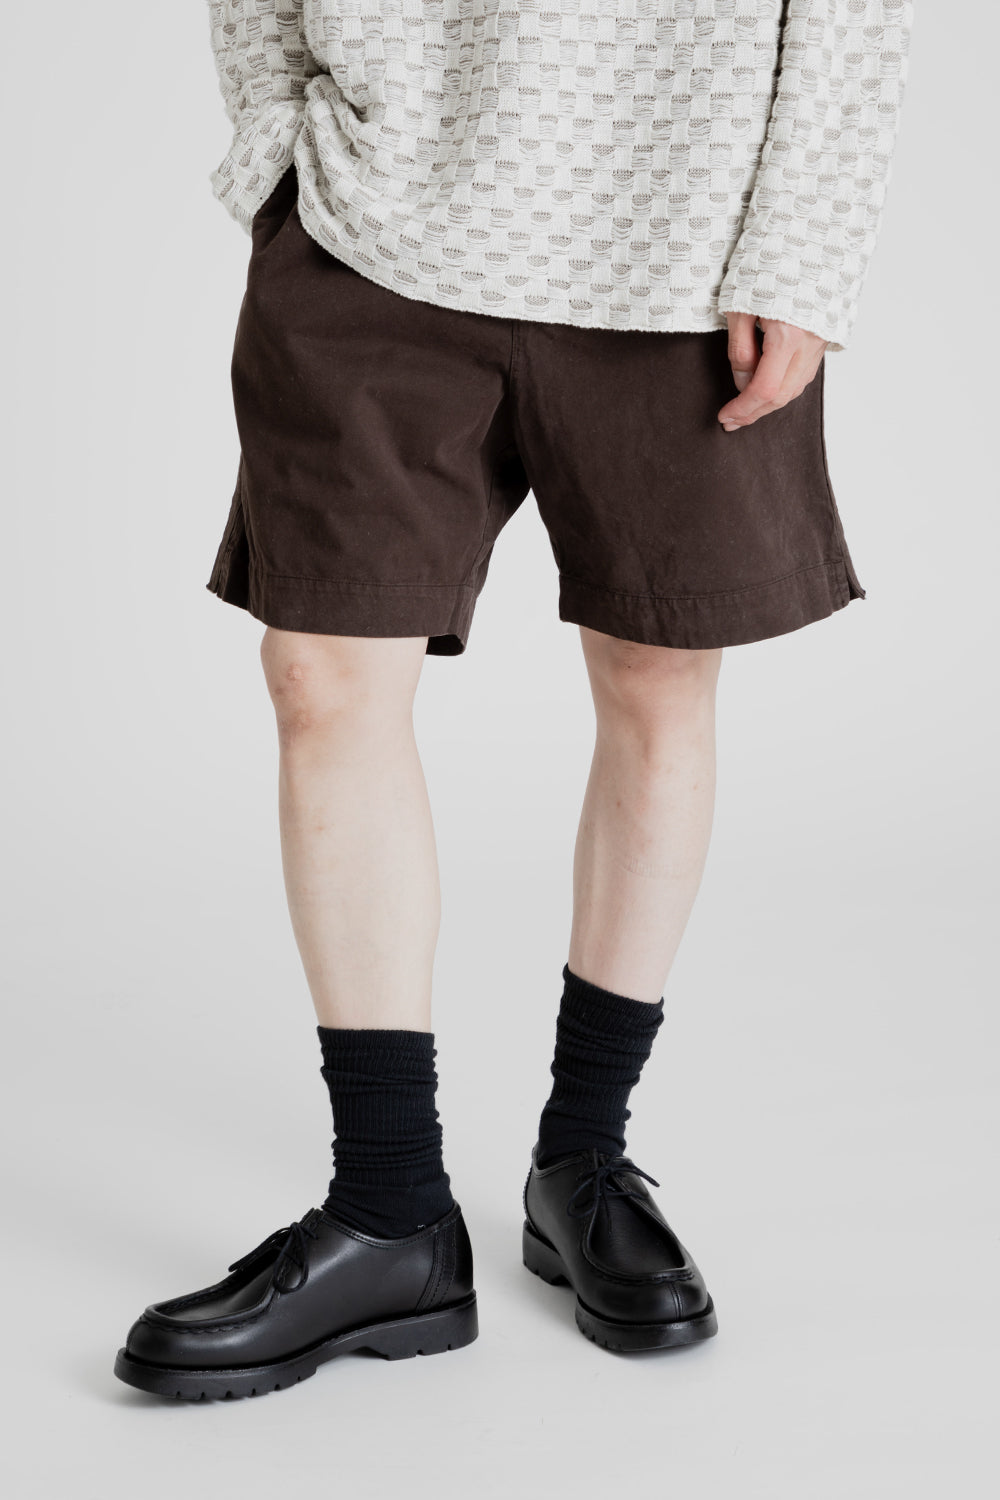 Schnayderman's Shorts Twill GD in Chocolate